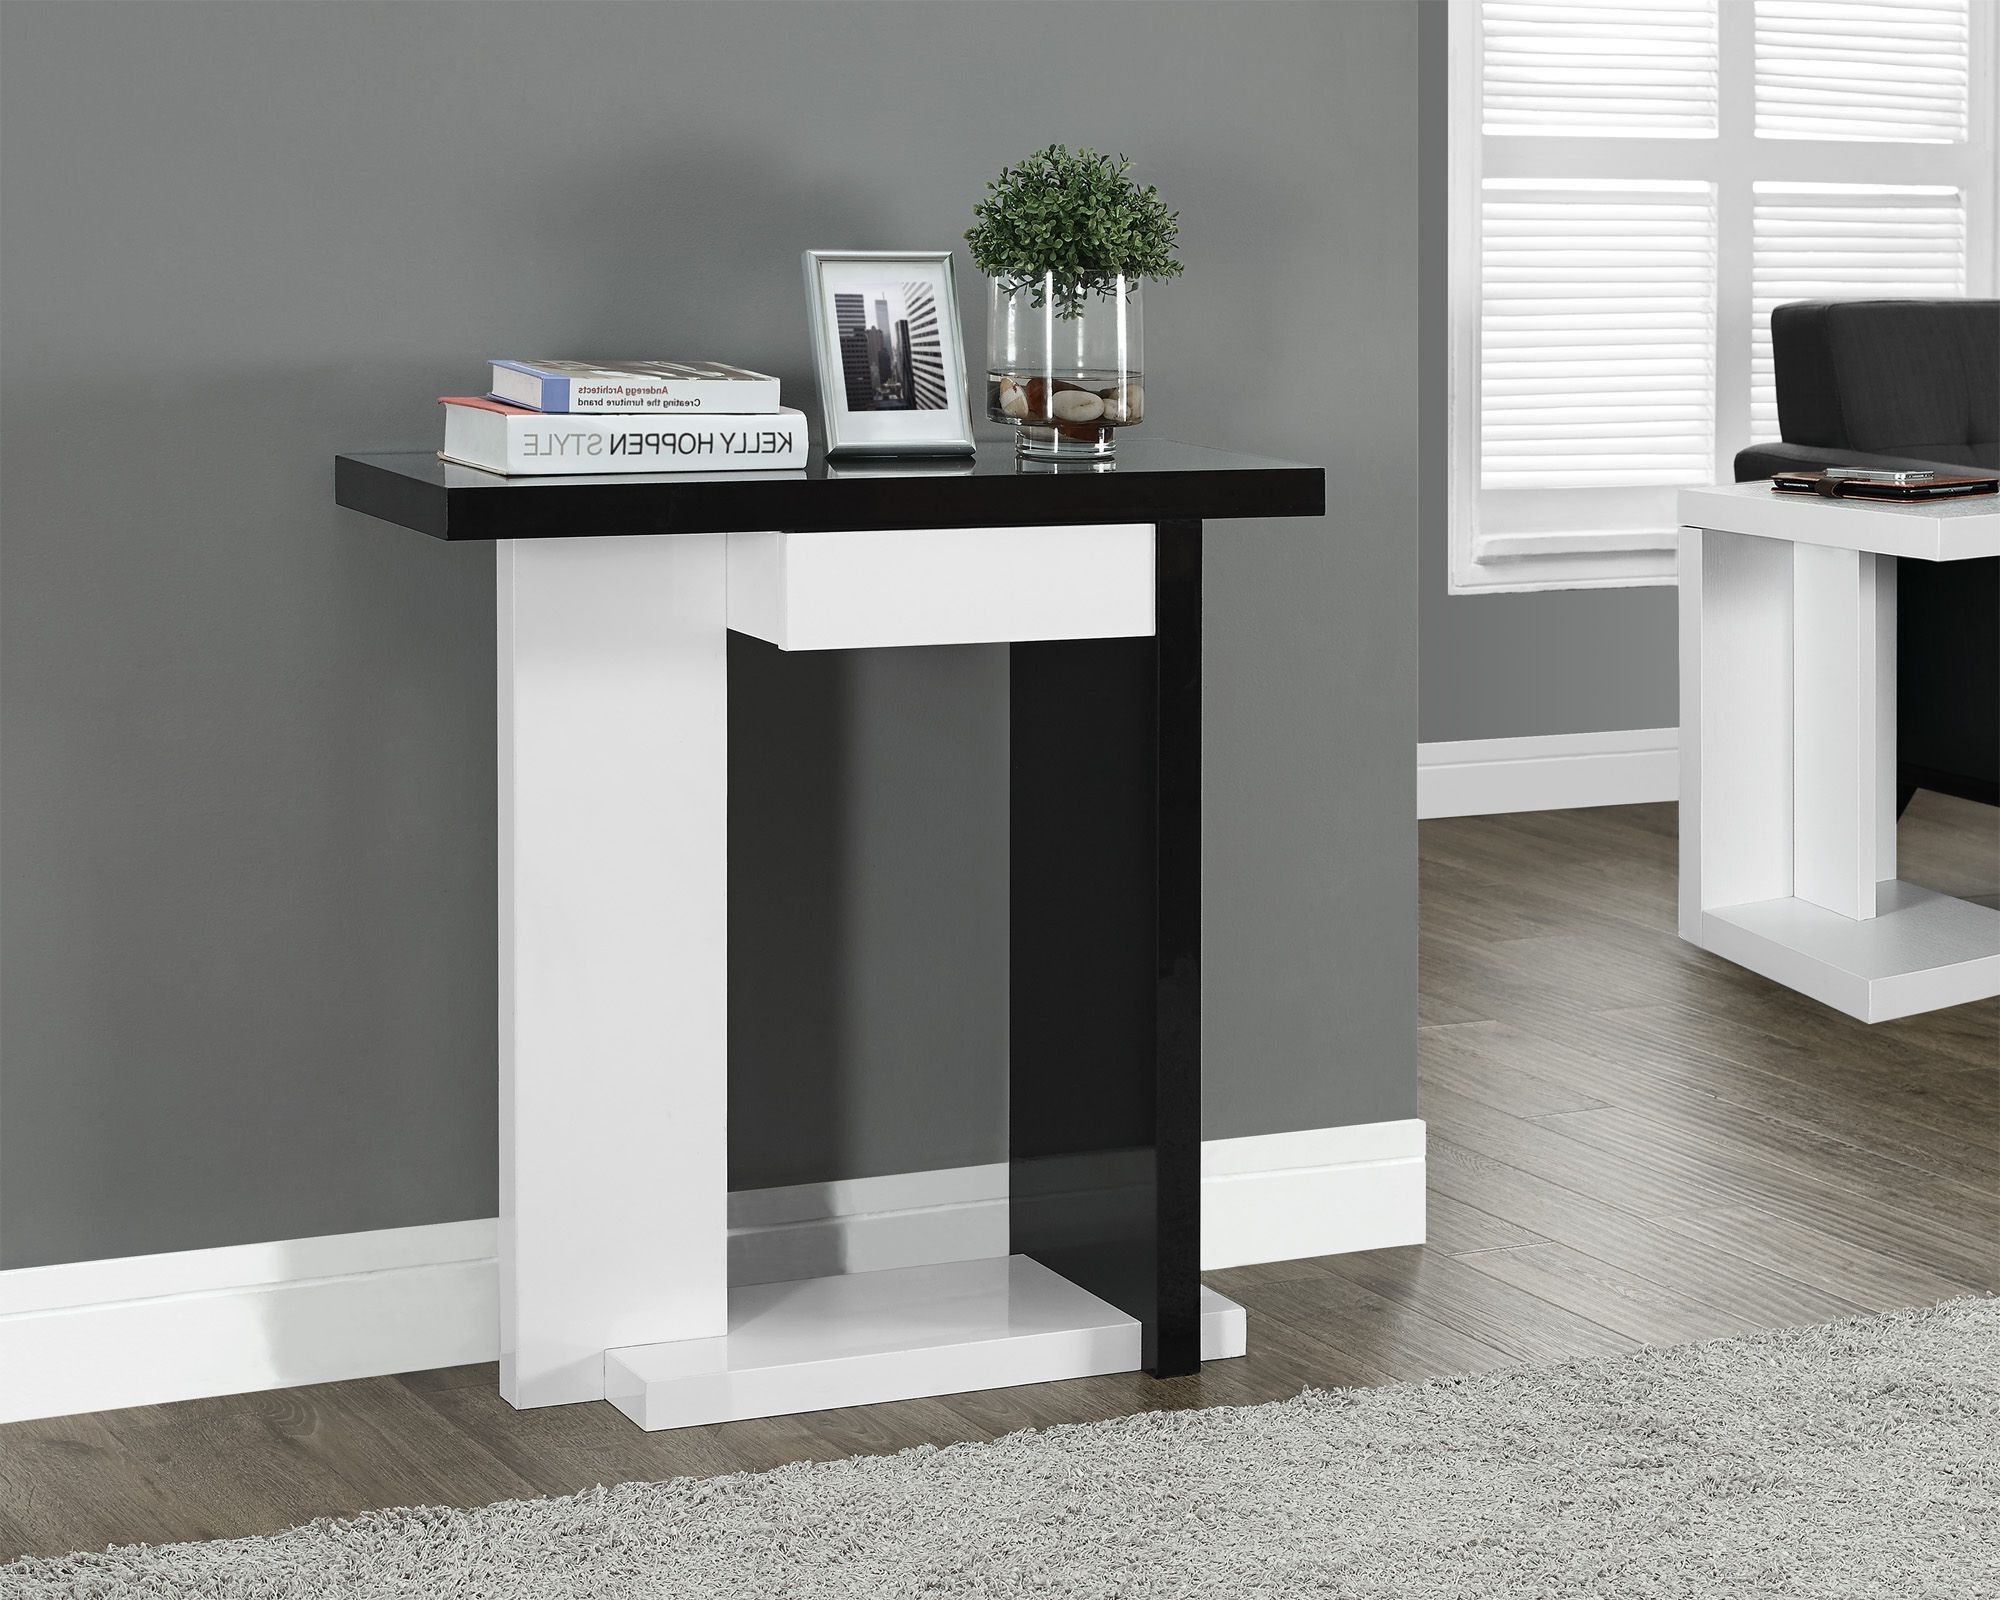 Glossy White/black 32" Hall Console Accent Table From Throughout Favorite Square High Gloss Console Tables (View 1 of 10)